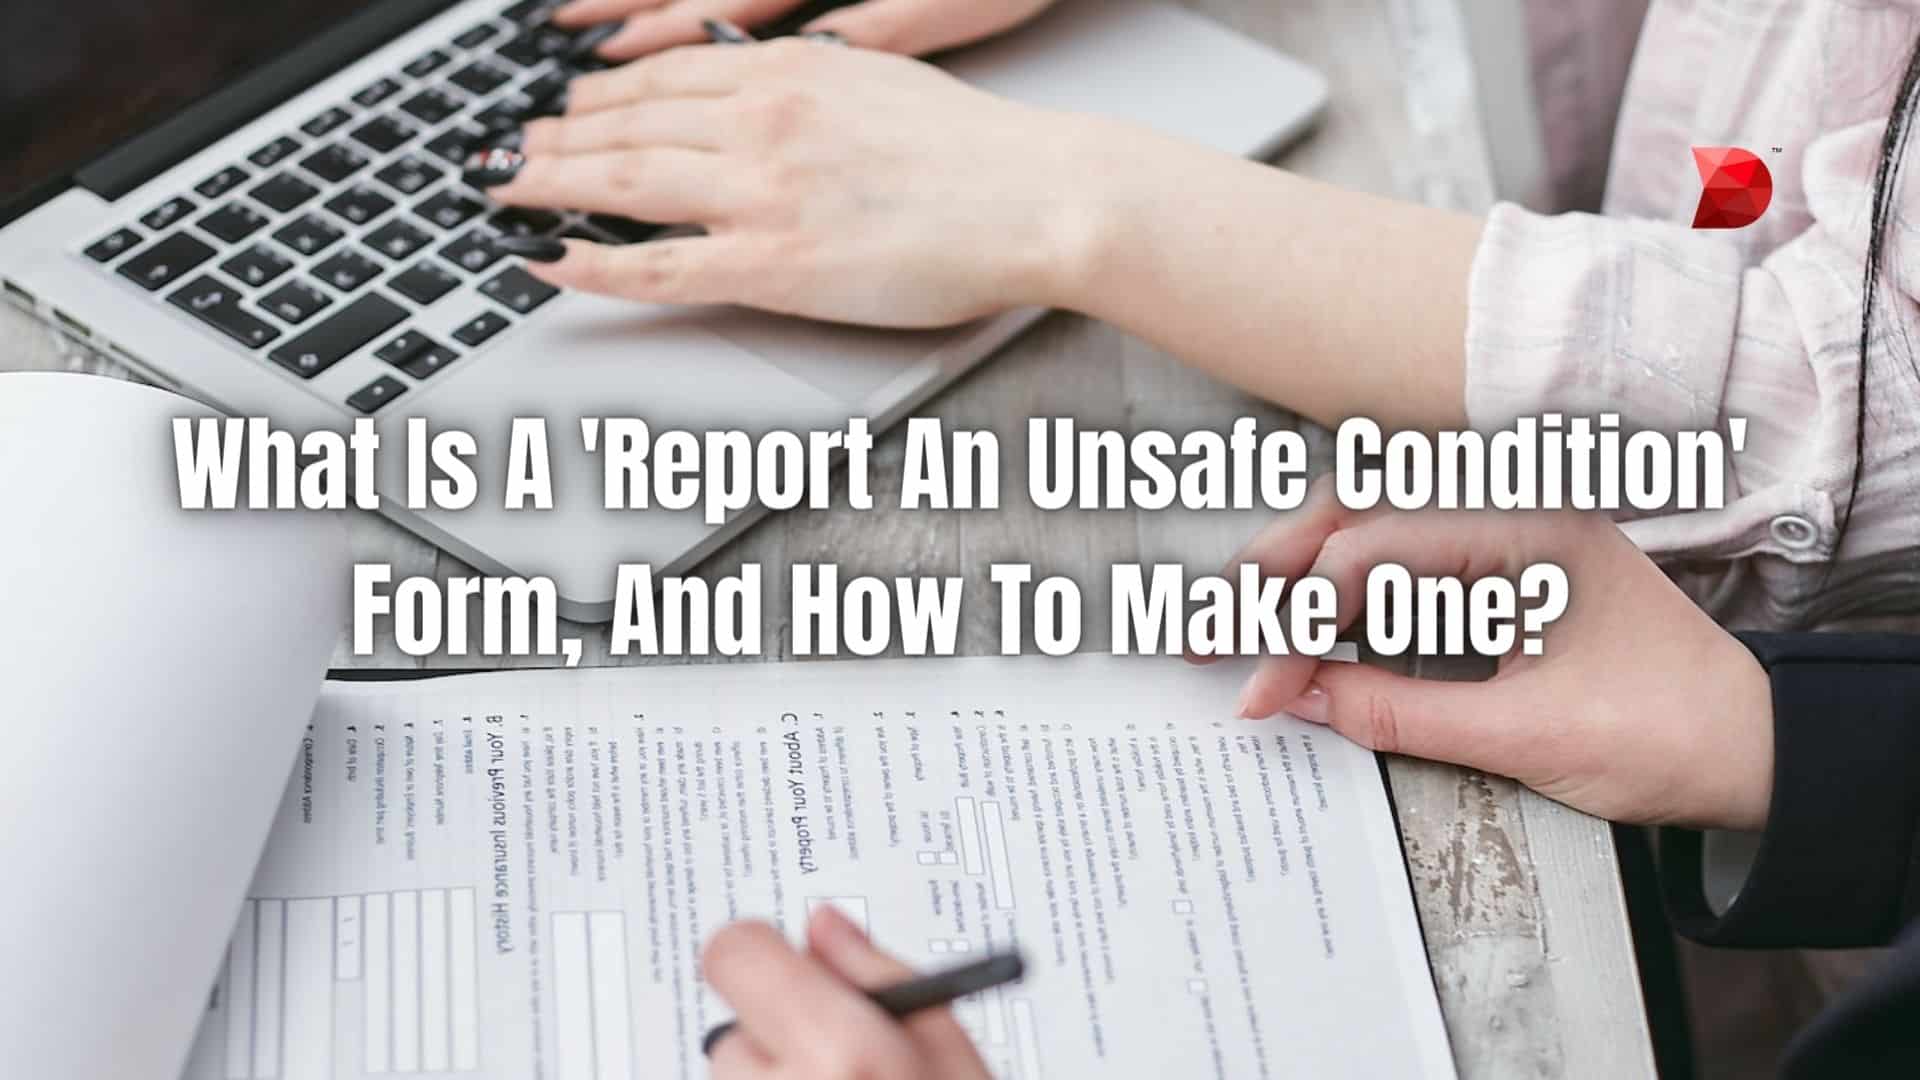 What Is A 'Report An Unsafe Condition' Form, And How To Make One